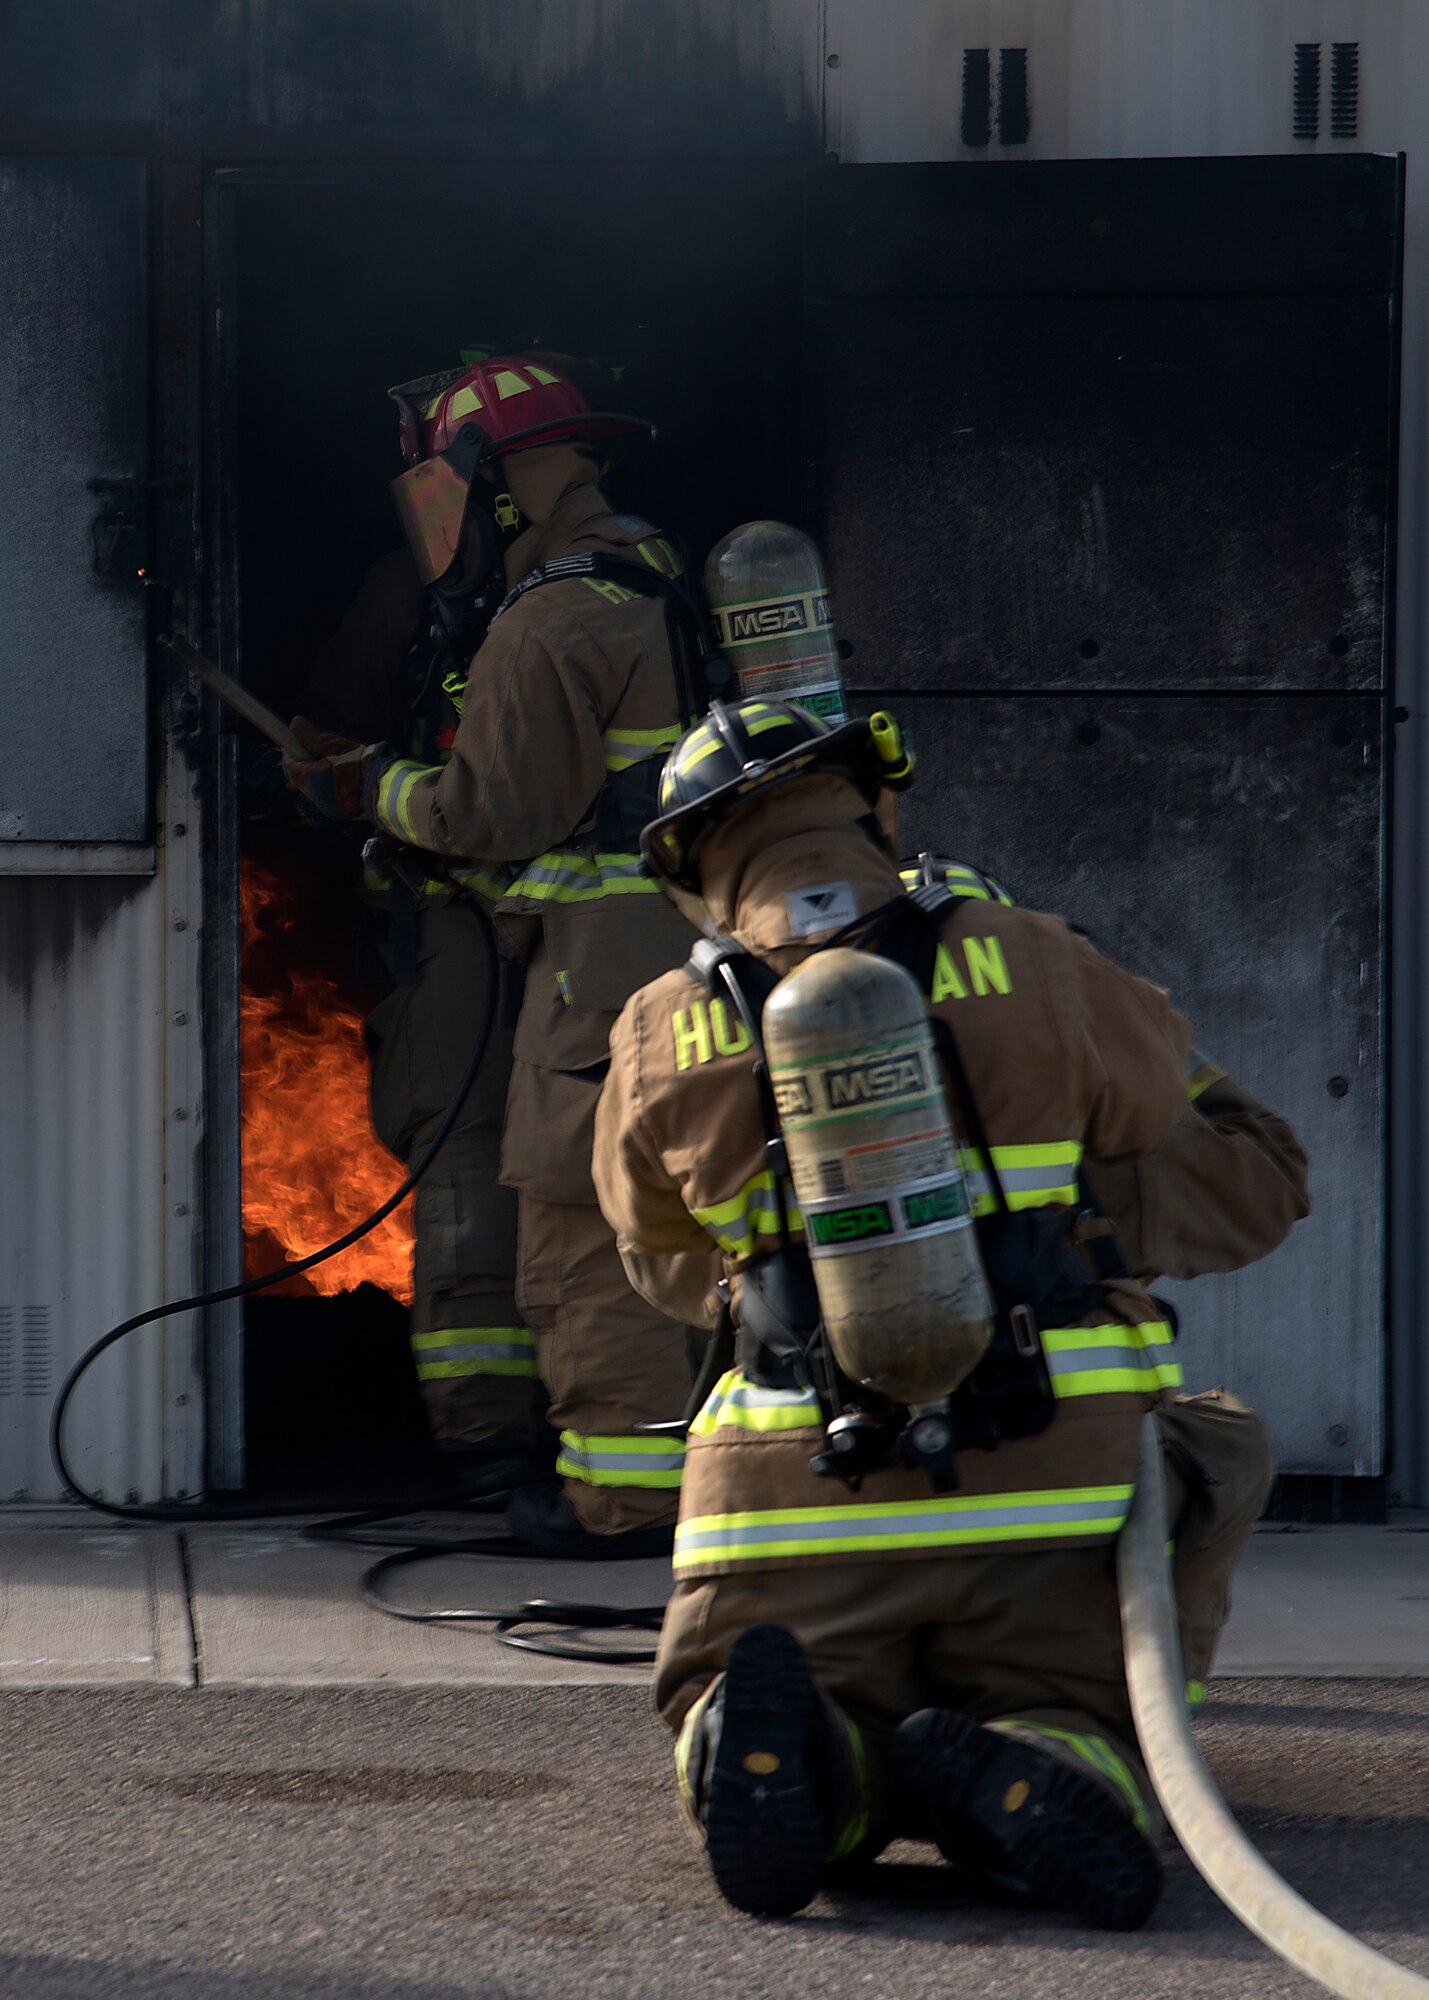 Two firefighters hold a fire hose as they extinguish flames during an exercise.